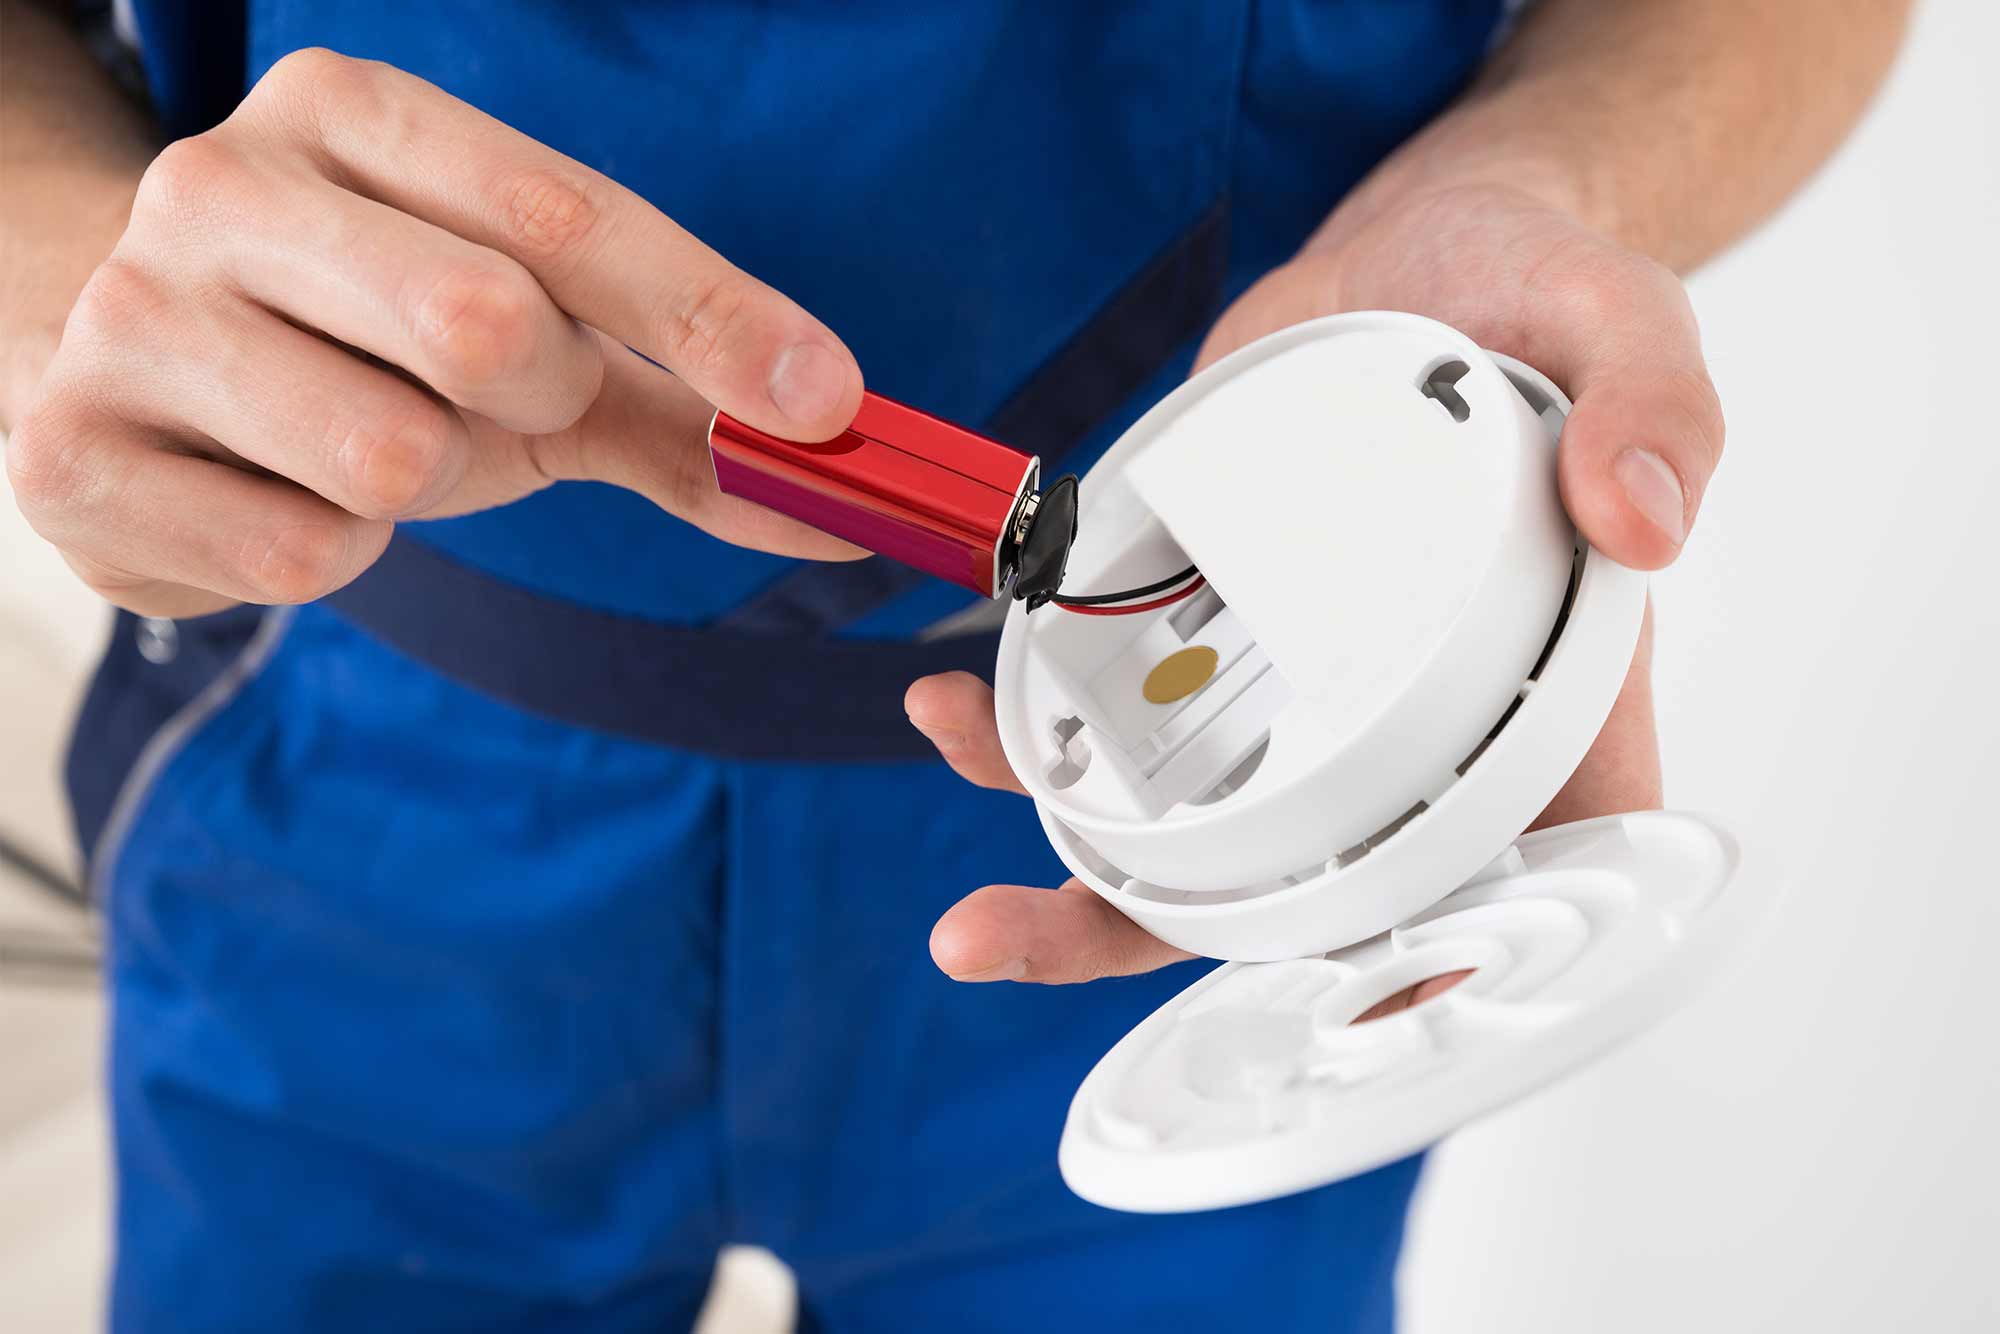 Checkmate Safety Smoke Alarm Testing and Smoke Alarm Servicing System is EASY and EFFECTIVE.